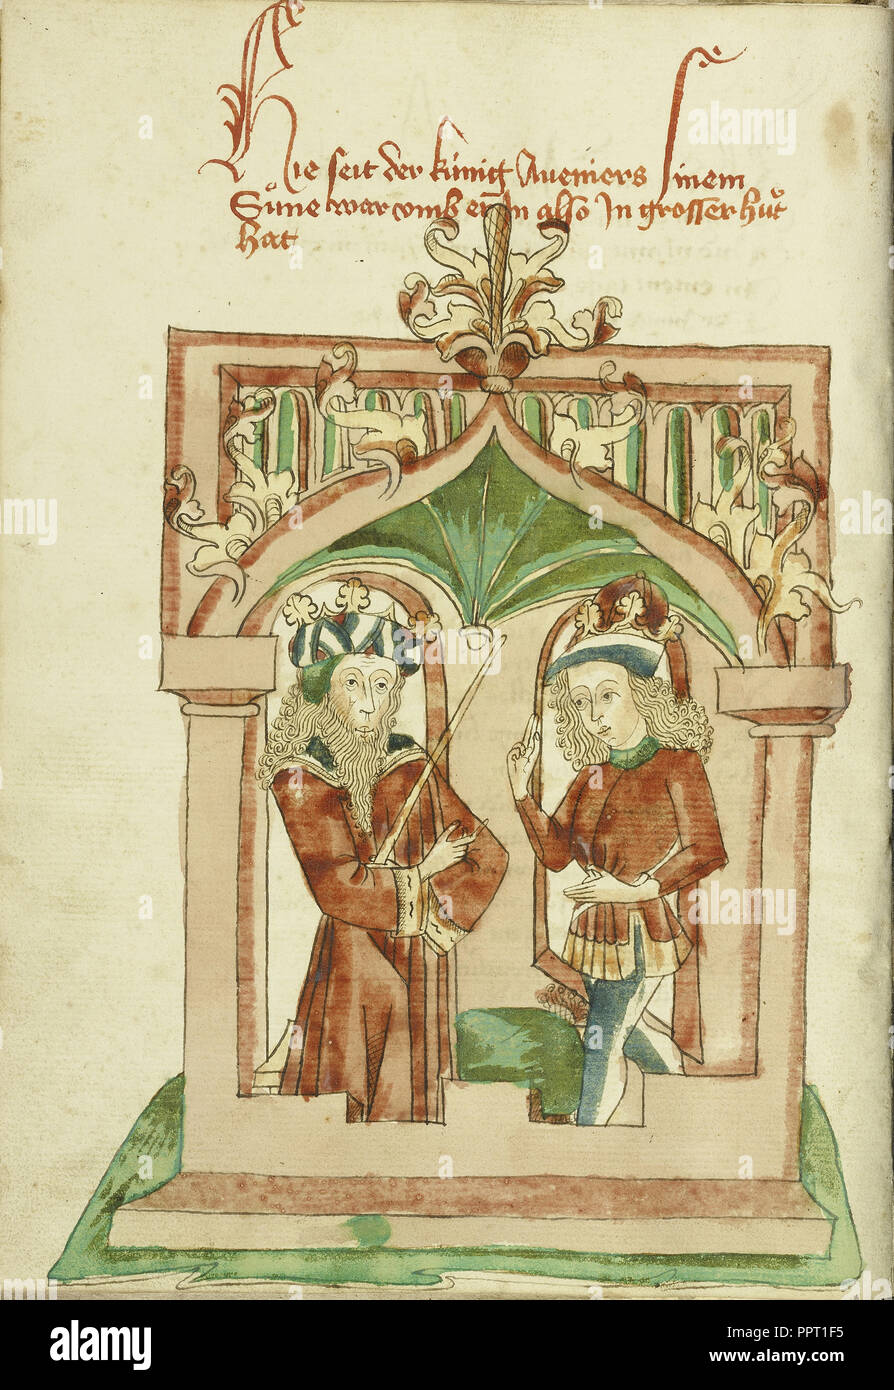 King Avenir Converses with Josaphat; Follower of Hans Schilling, German, active 1459 - 1467, from the Workshop of Diebold Stock Photo